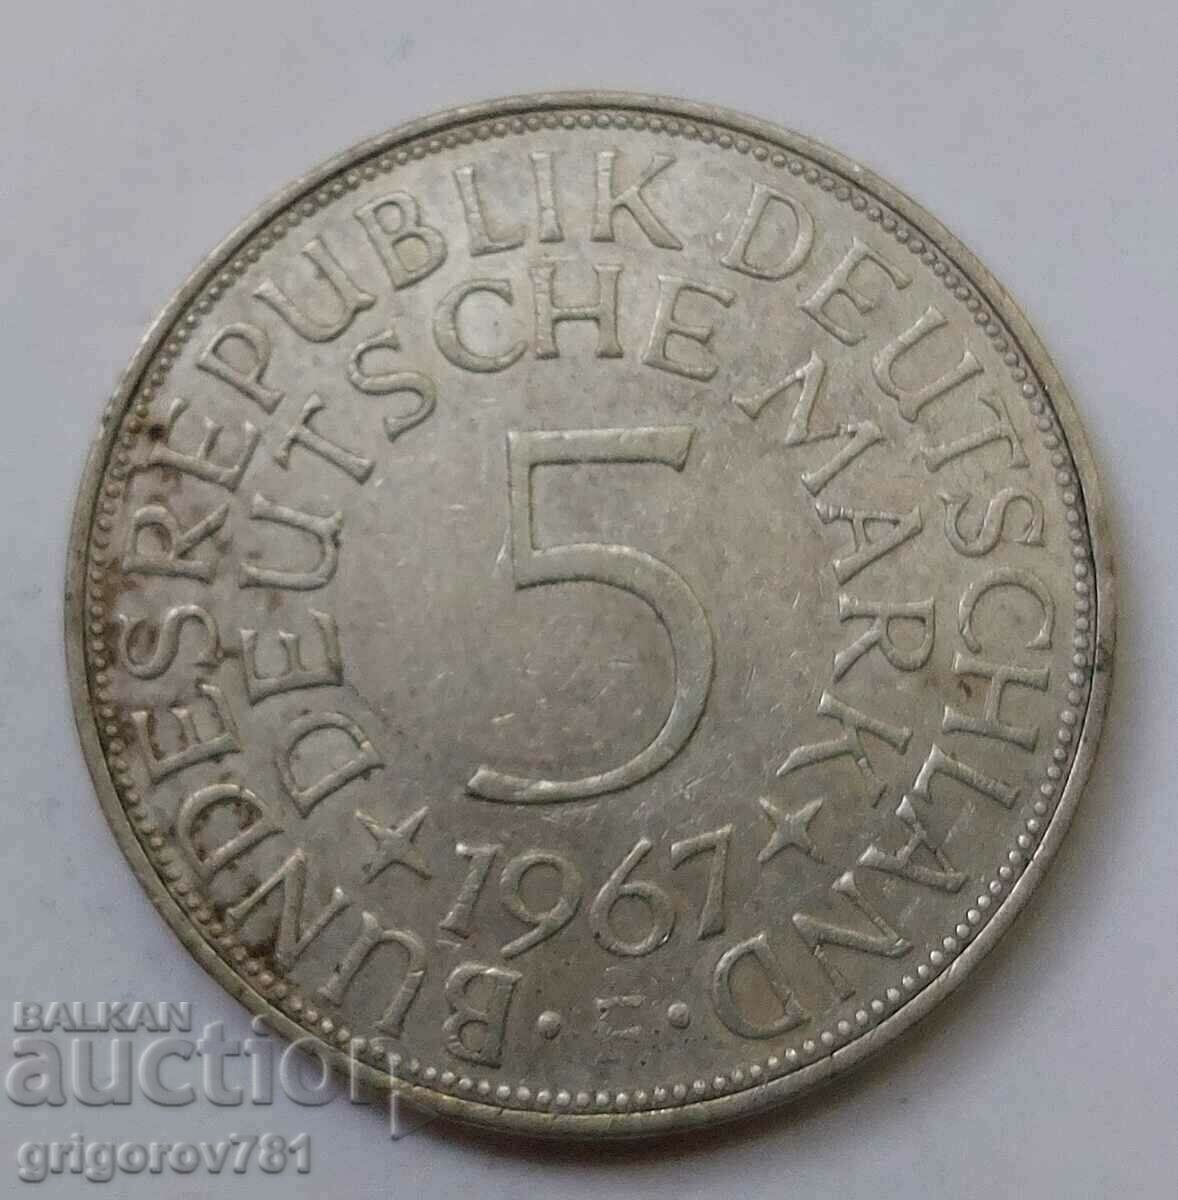 5 marks silver Germany 1967 F - silver coin